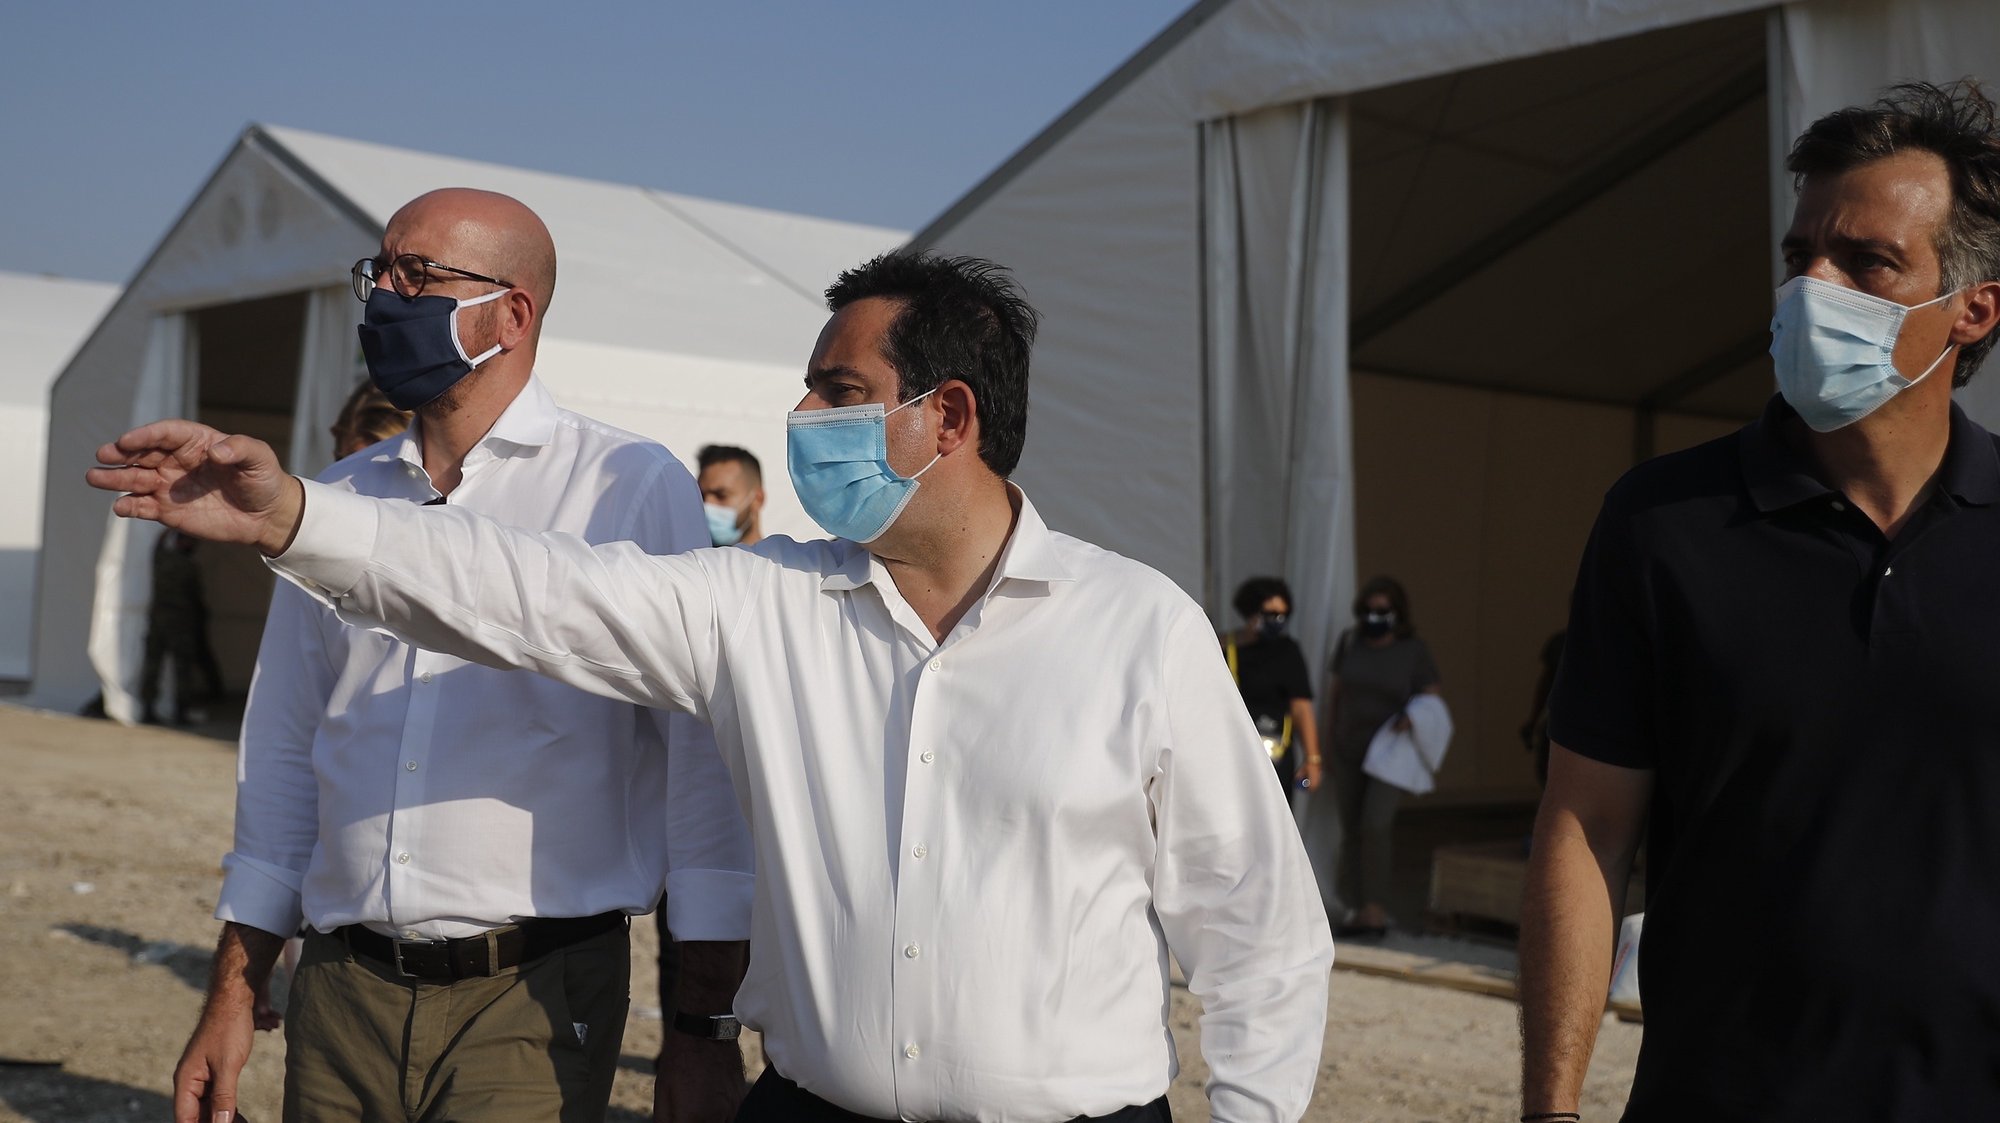 epa08670787 European Council President Charles Michel (C) walks with Greek Minister of Citizen Protection Michalis Chrisochoidis (2R) and Greek Minister for Immigration and Asylum Notis Mitarakis (1R) during his visit in the new refugees camp near Kara Tepe , on Lesbos island, Greece, 15 September 2020.  EPA/DIMITRIS TOSIDIS / POOL